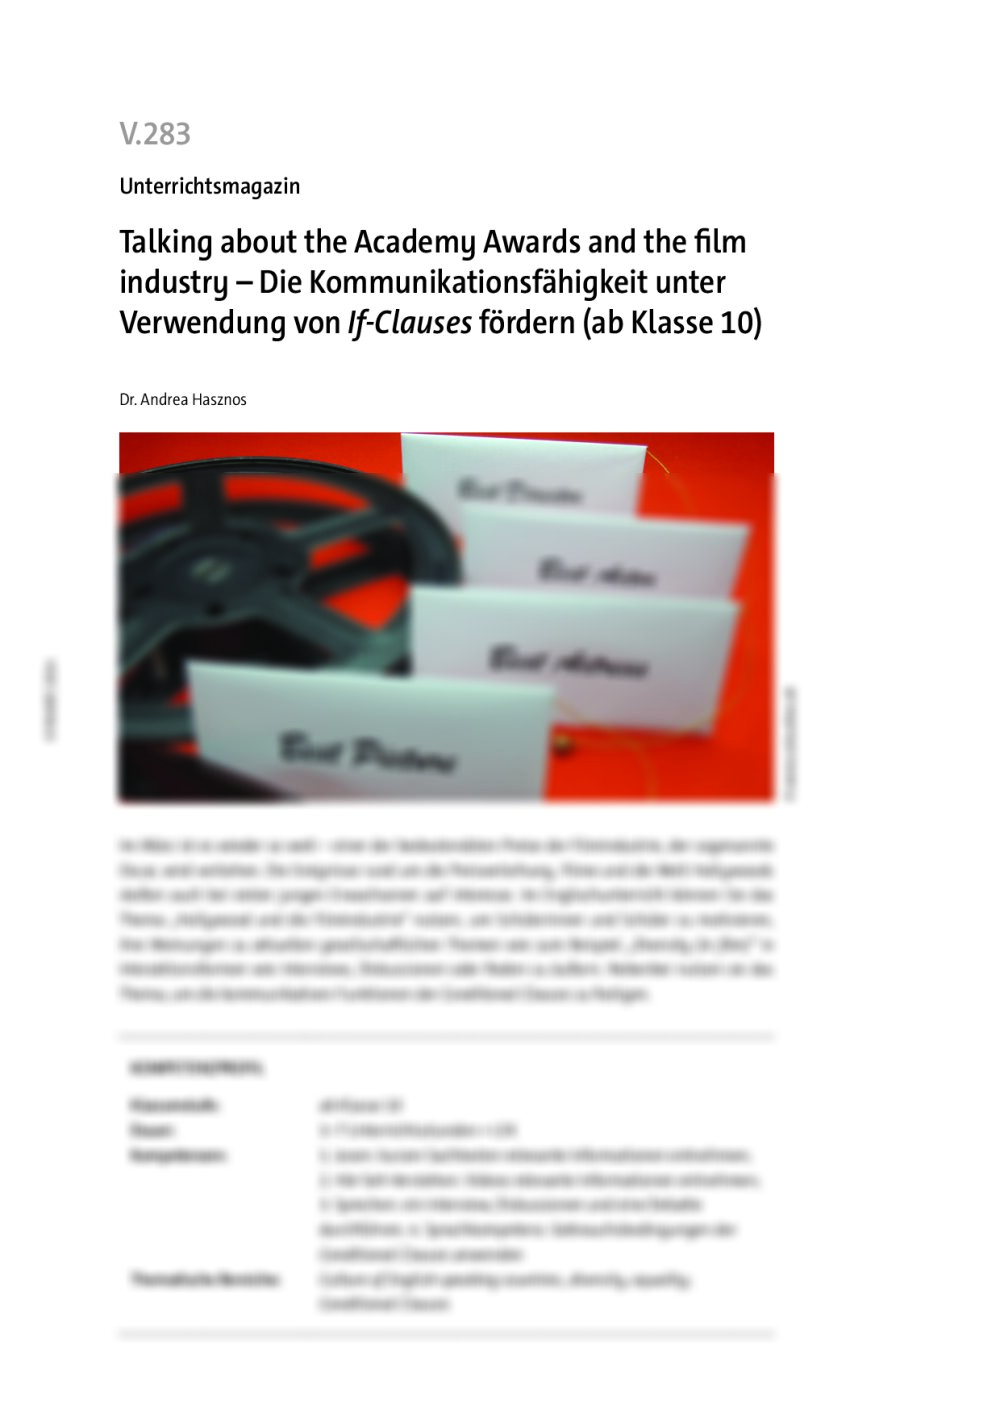 Talking about the Academy Awards and the film industry  - Seite 1